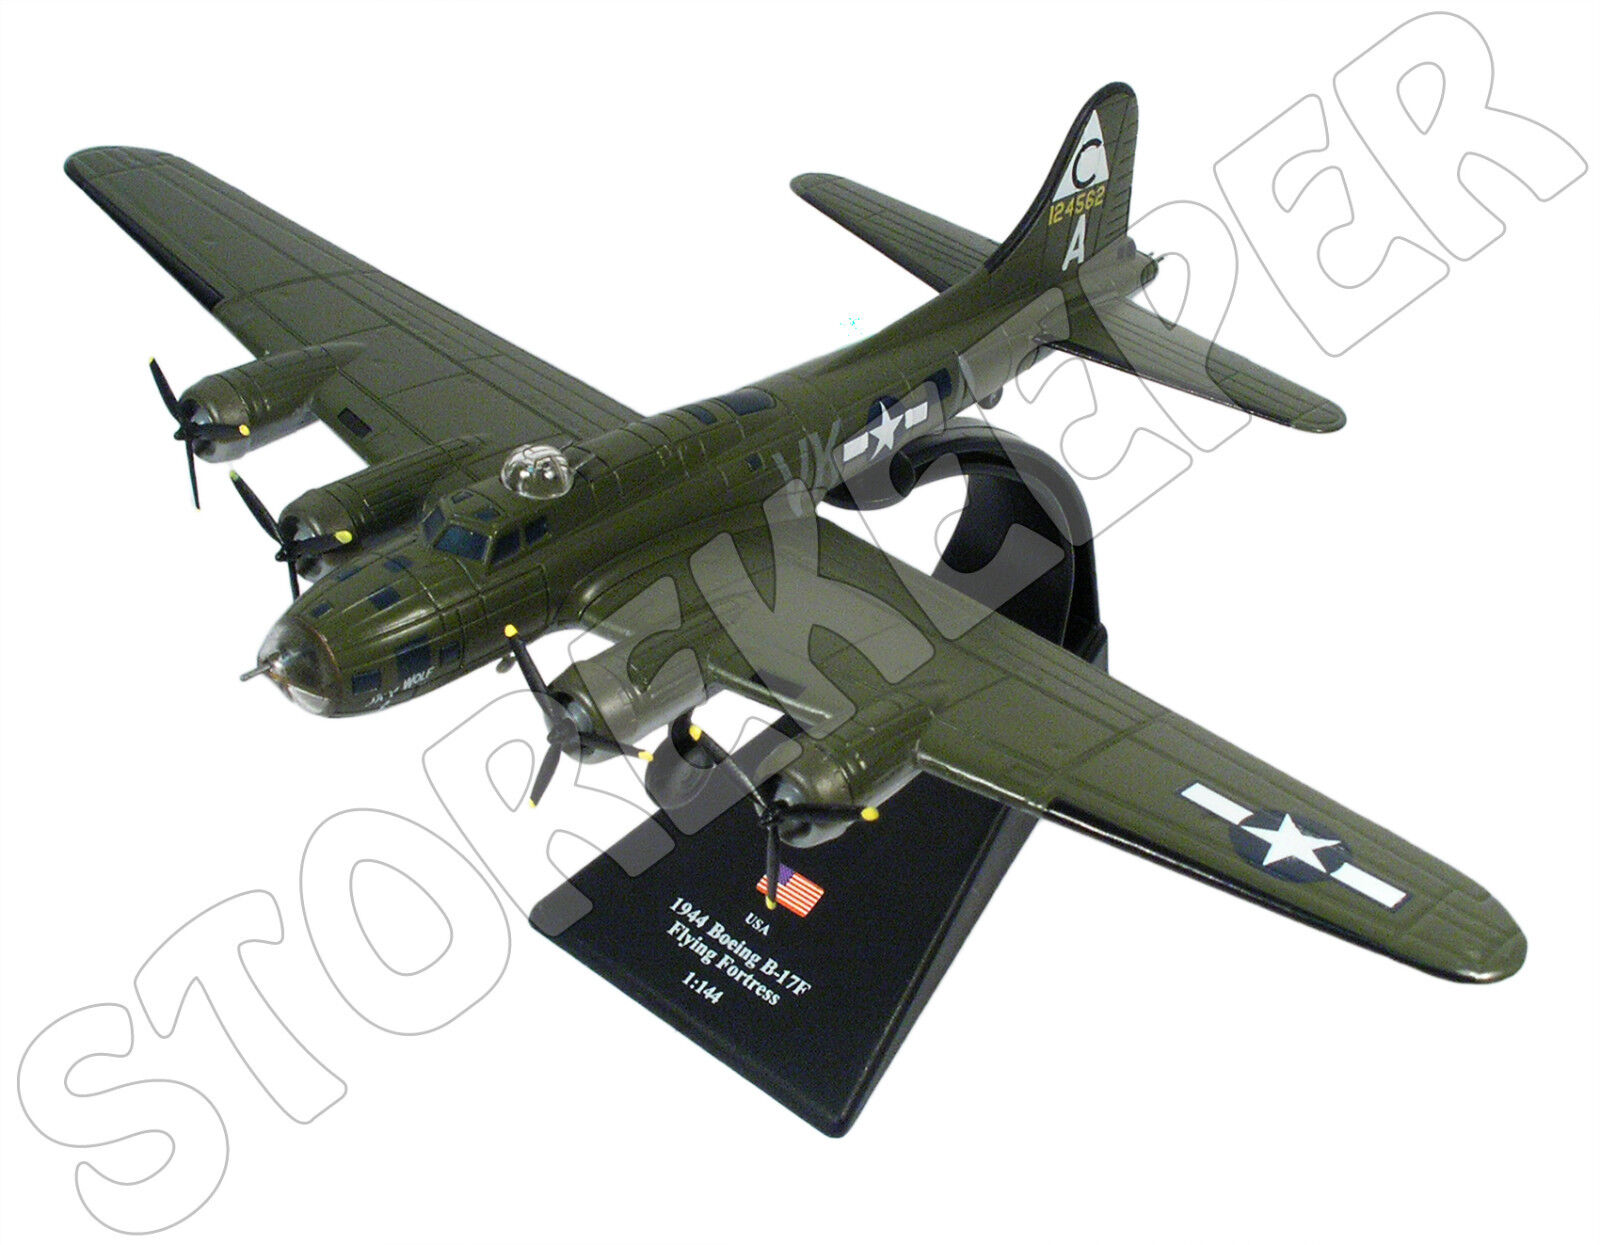 Boeing B-17F Flying Fortress - SKY WOLF - USA 1944 - 1/144 (No2)